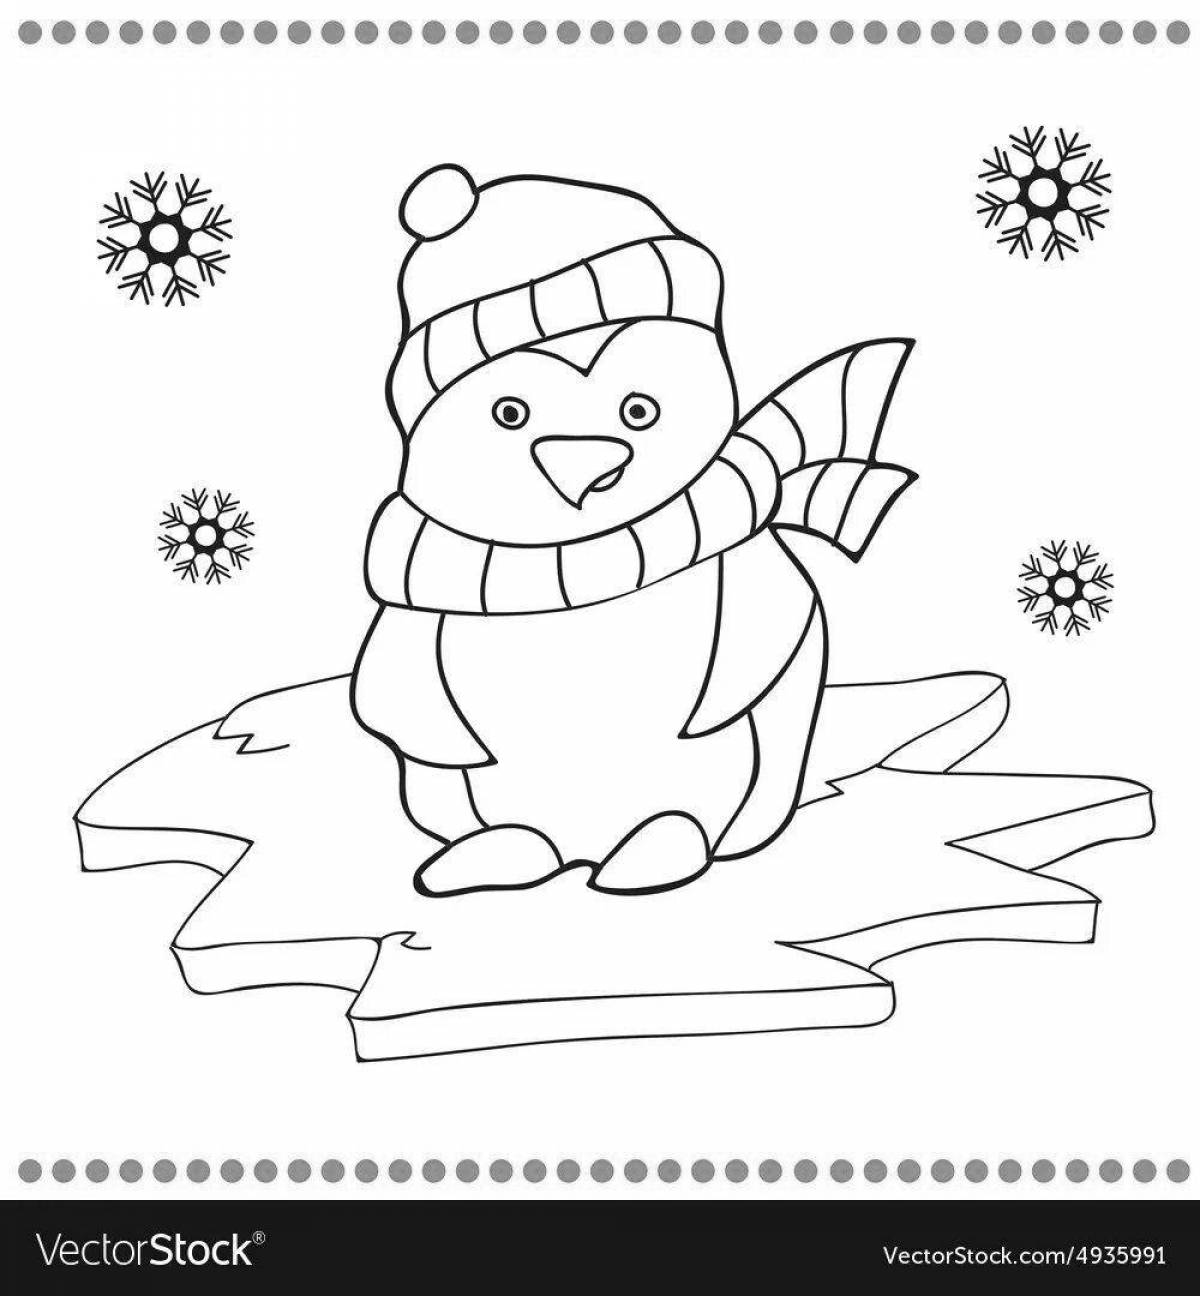 A wonderful penguin on an ice floe coloring pages for children